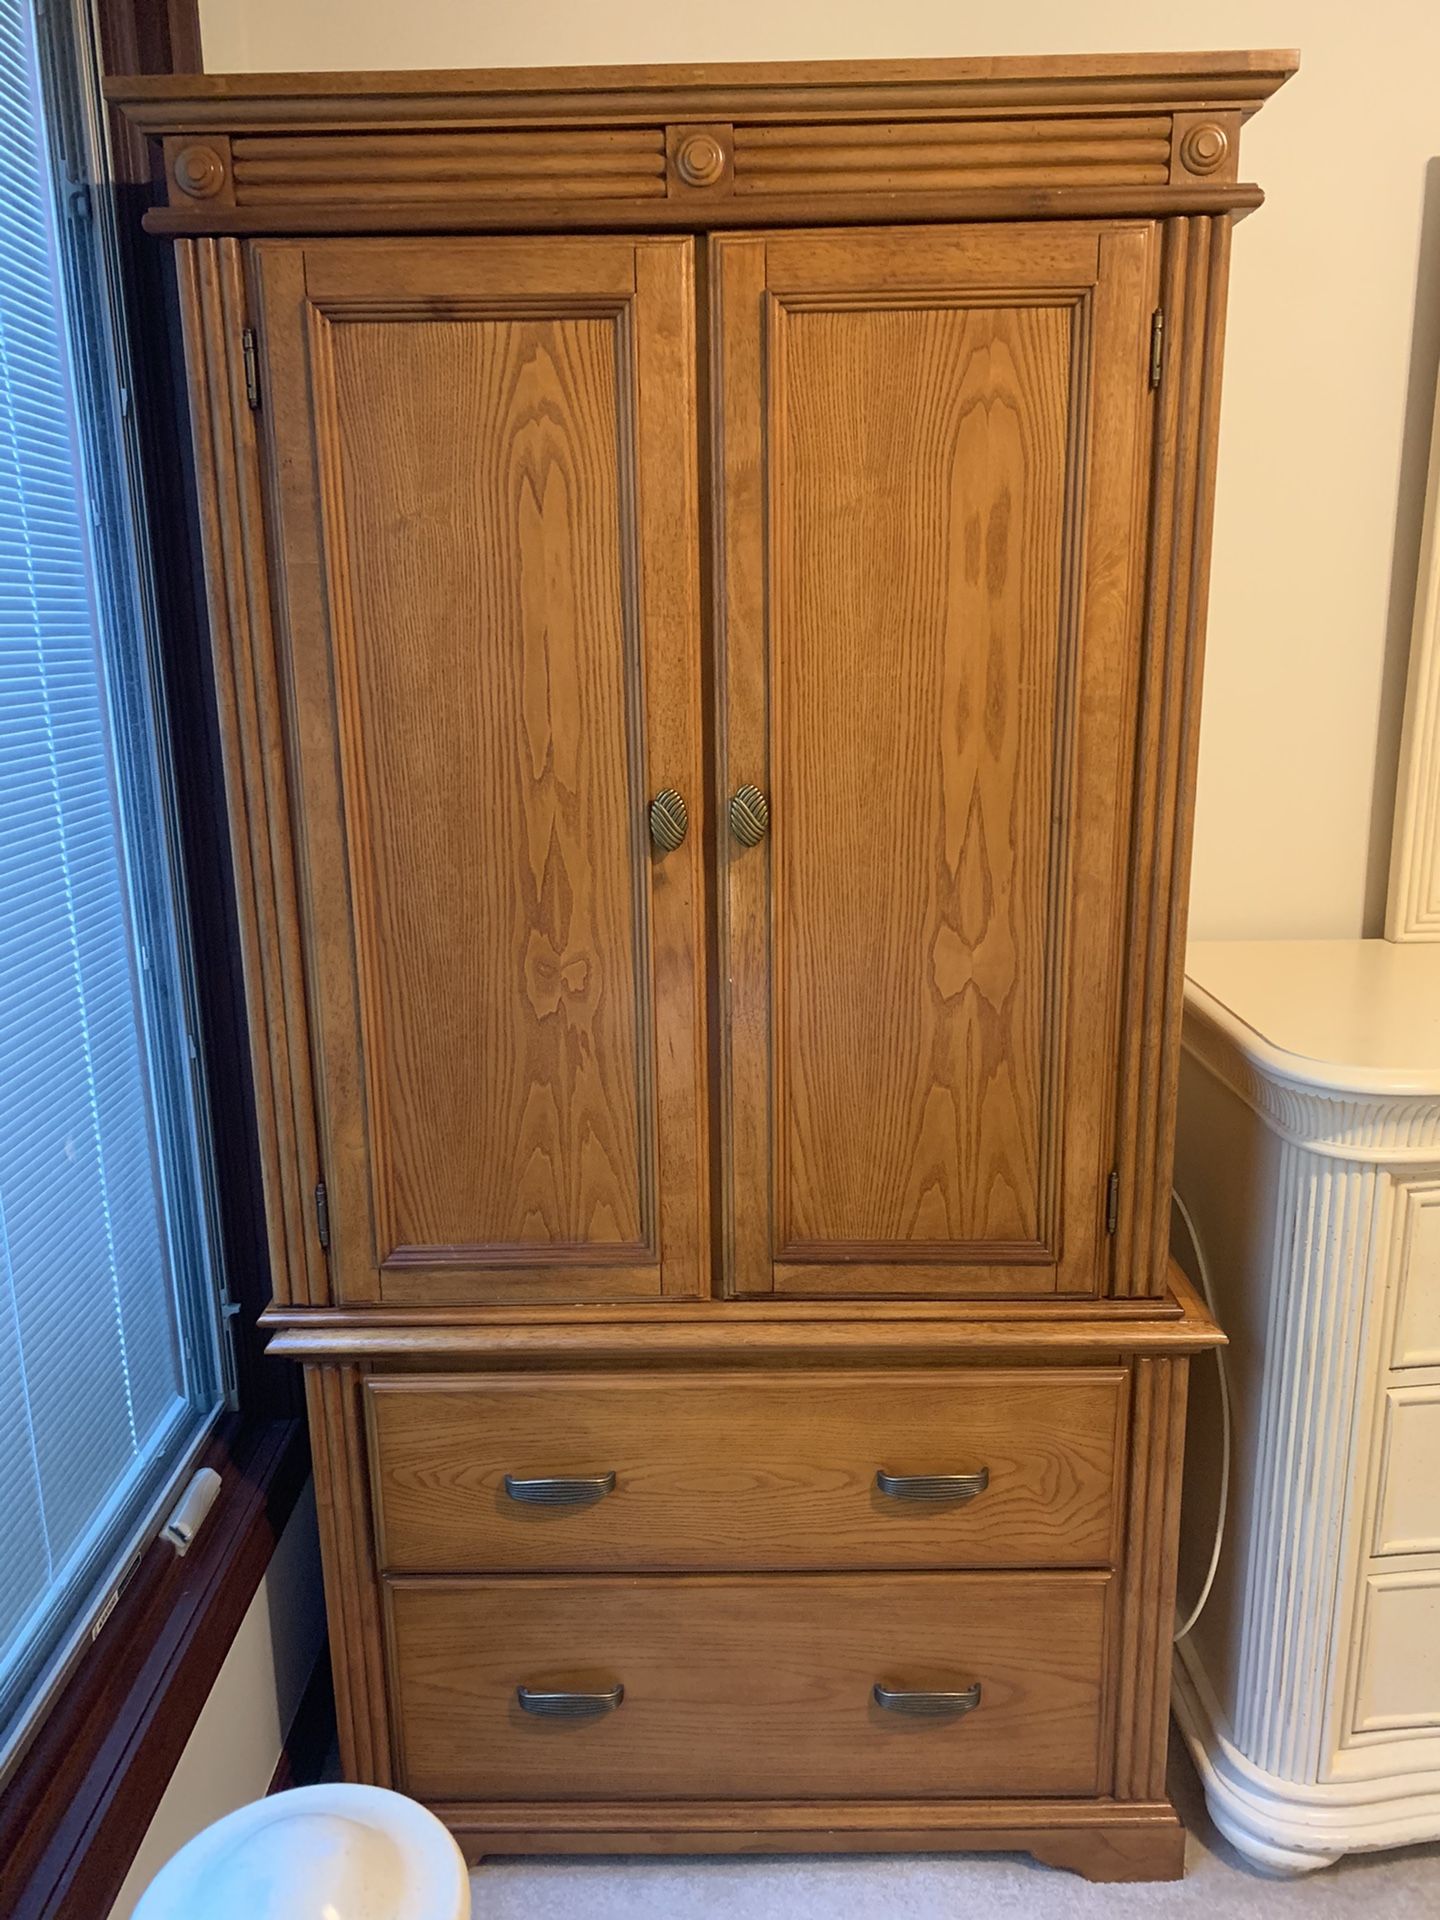 Armoire -2 lined deep drawers, 4 shelves